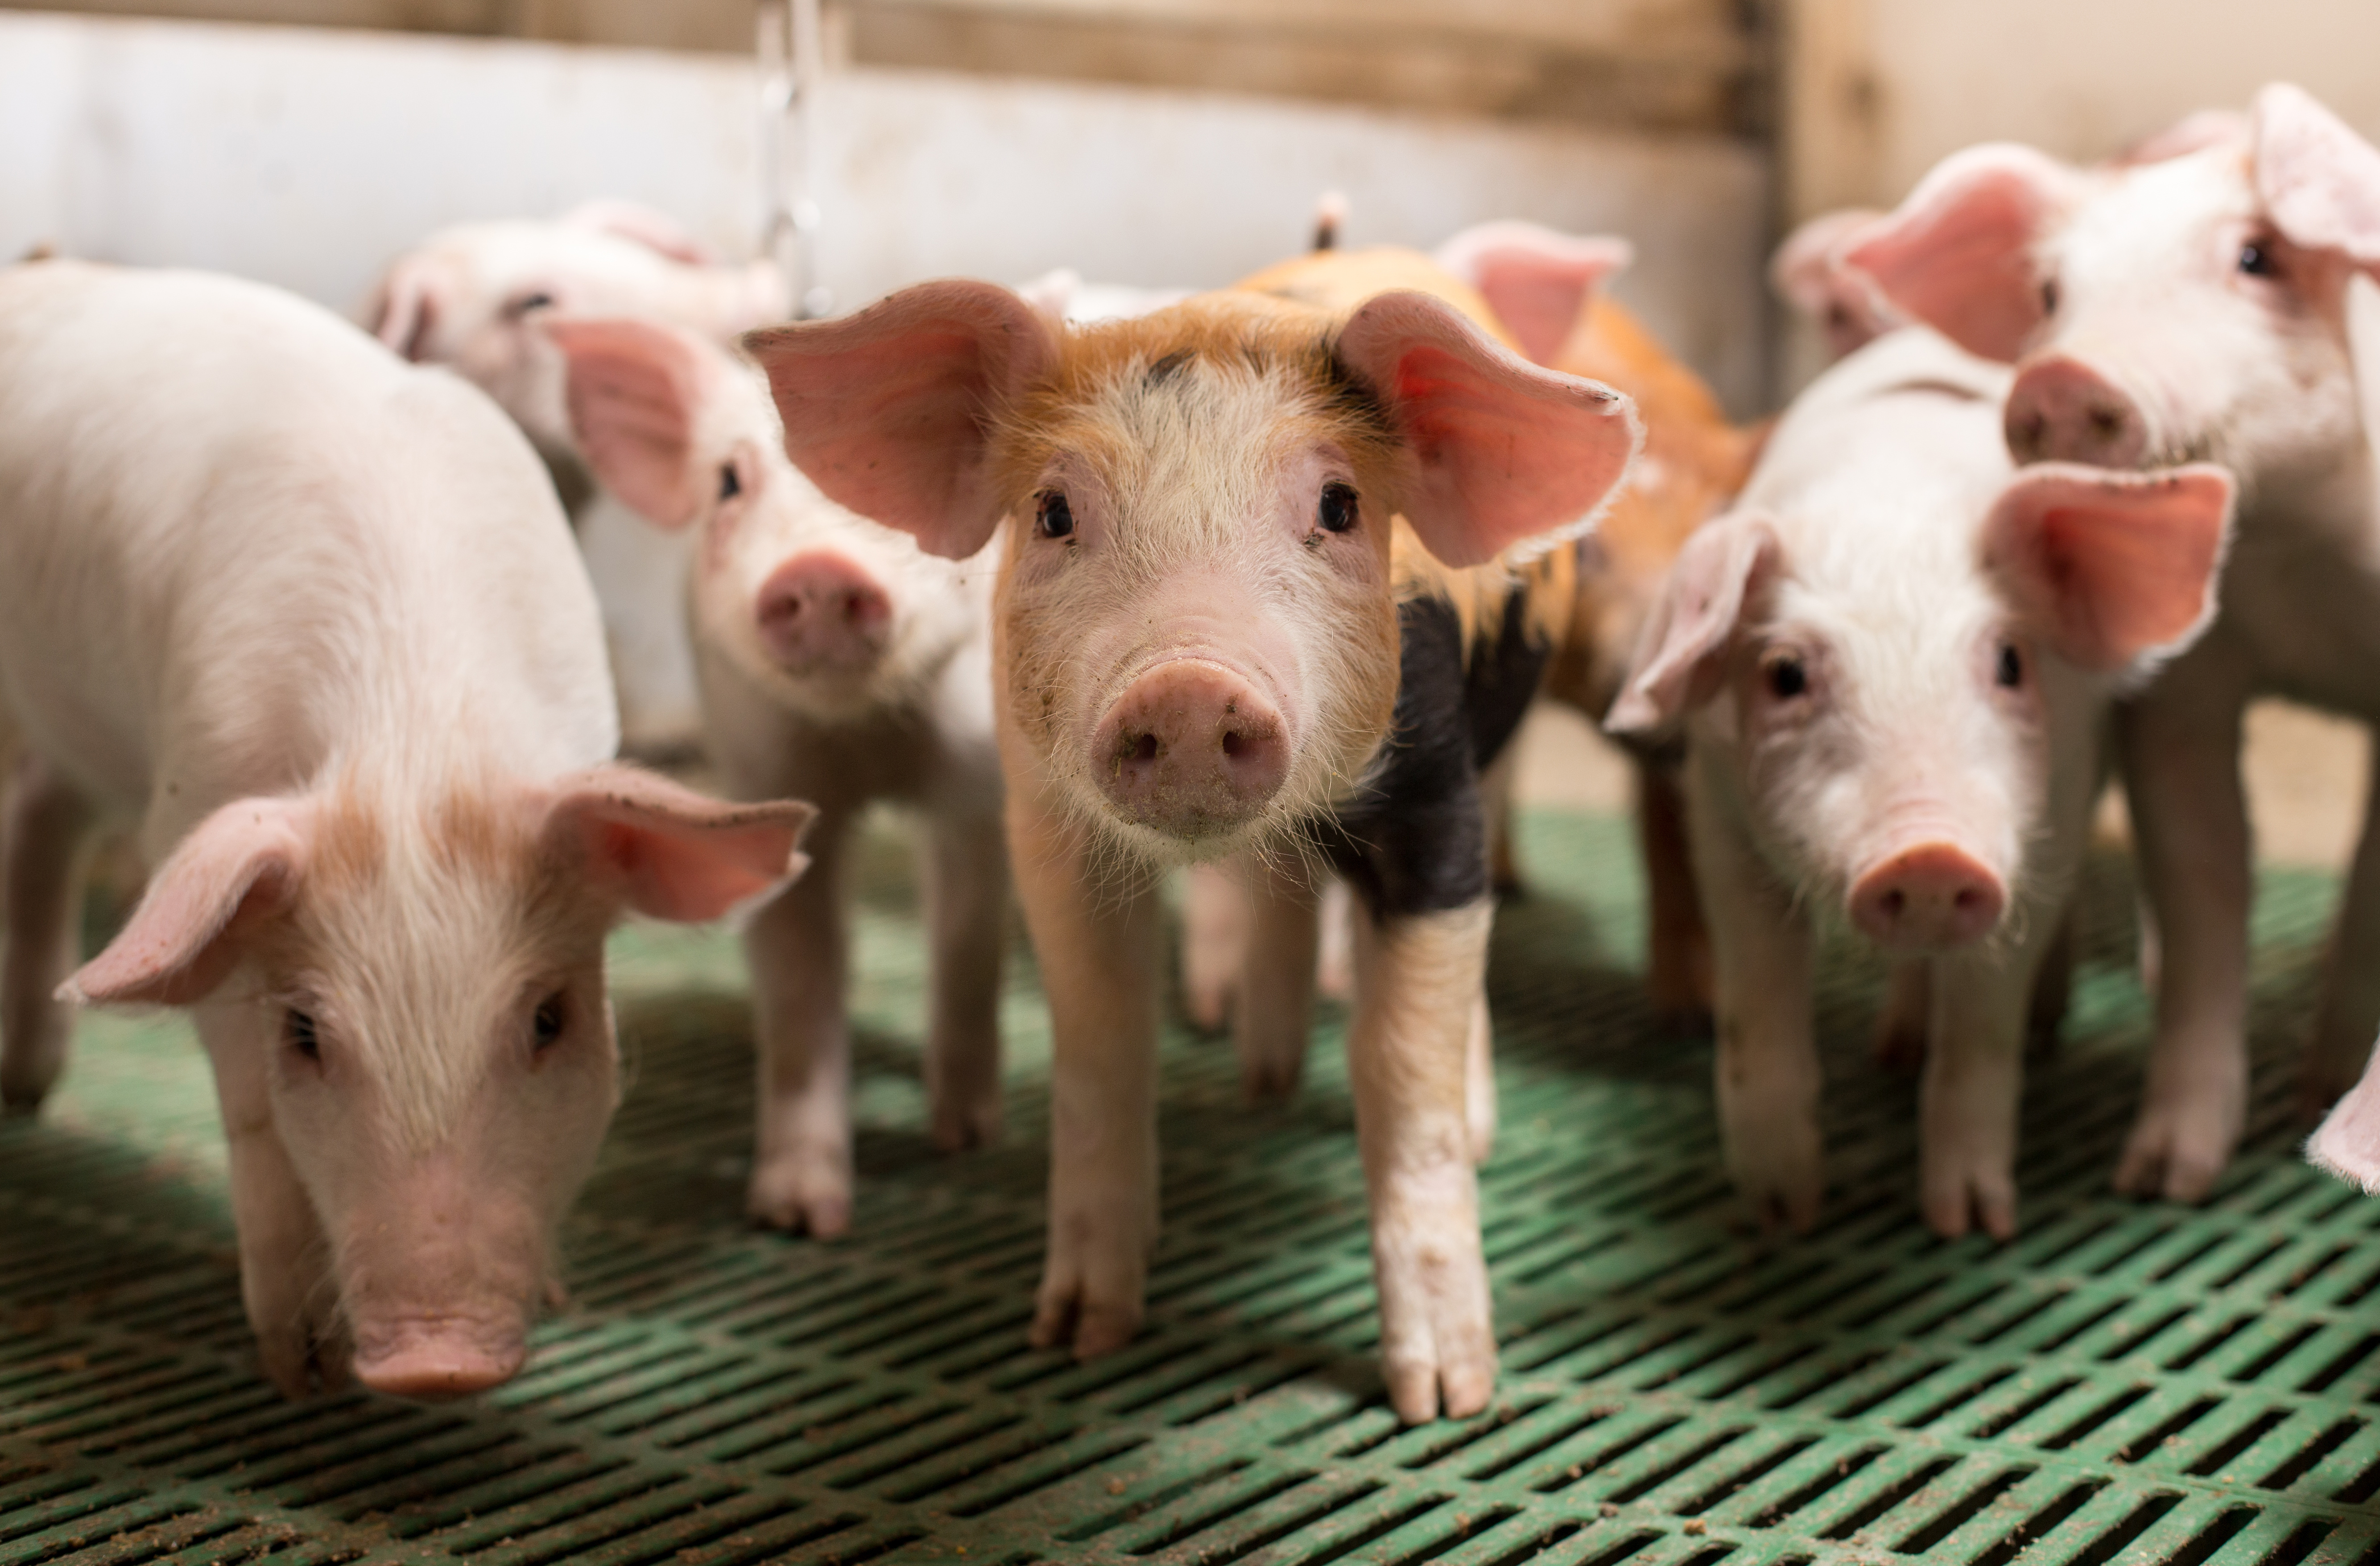 piglets in a fully slatted system stare directly at the camera